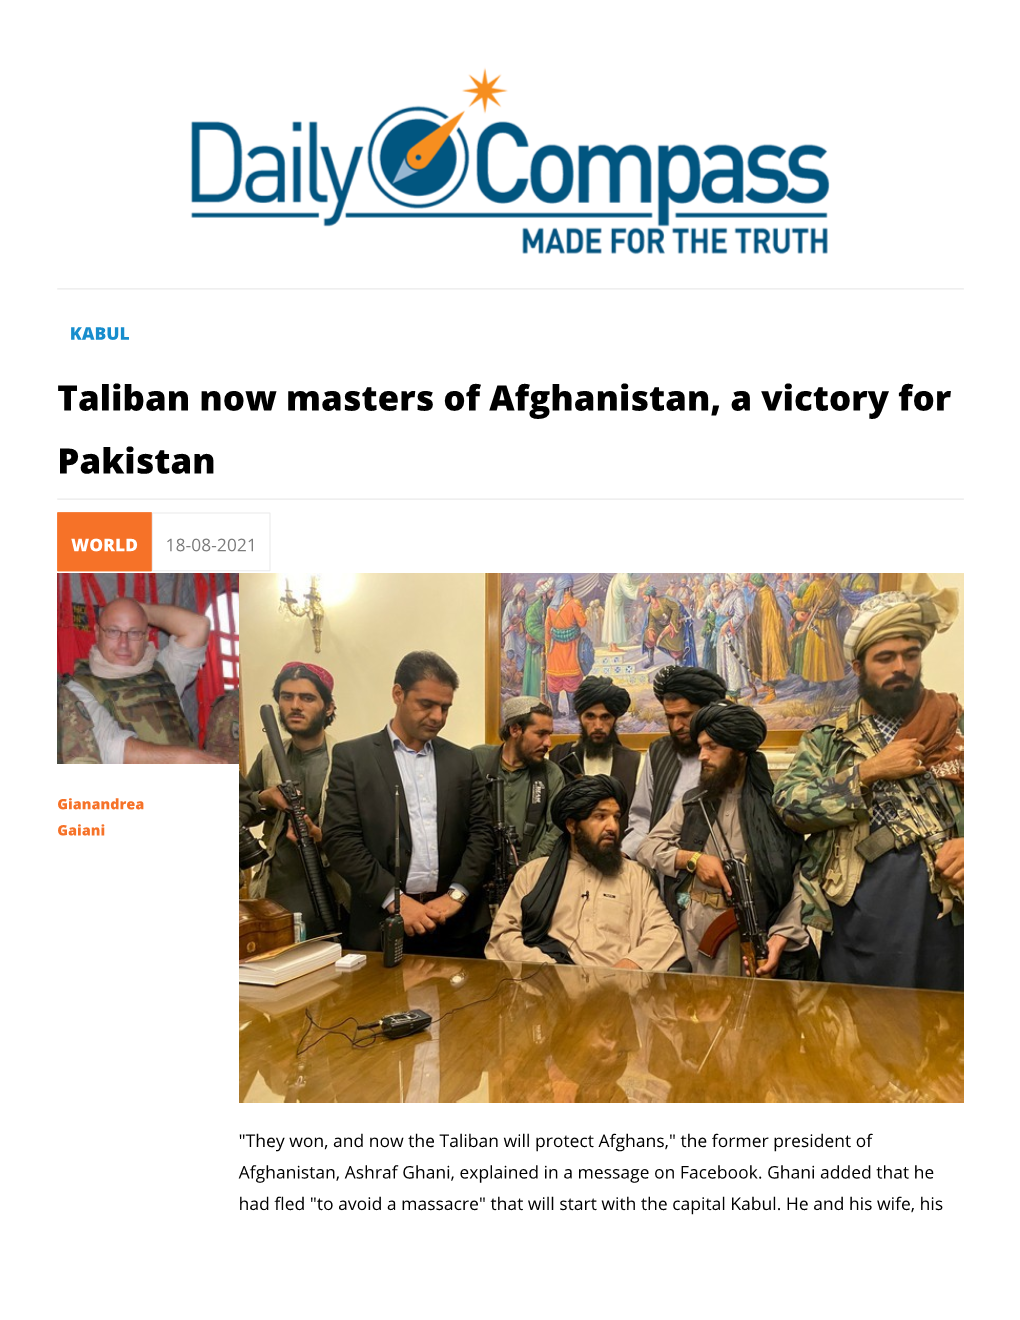 Taliban Now Masters of Afghanistan, a Victory for Pakistan